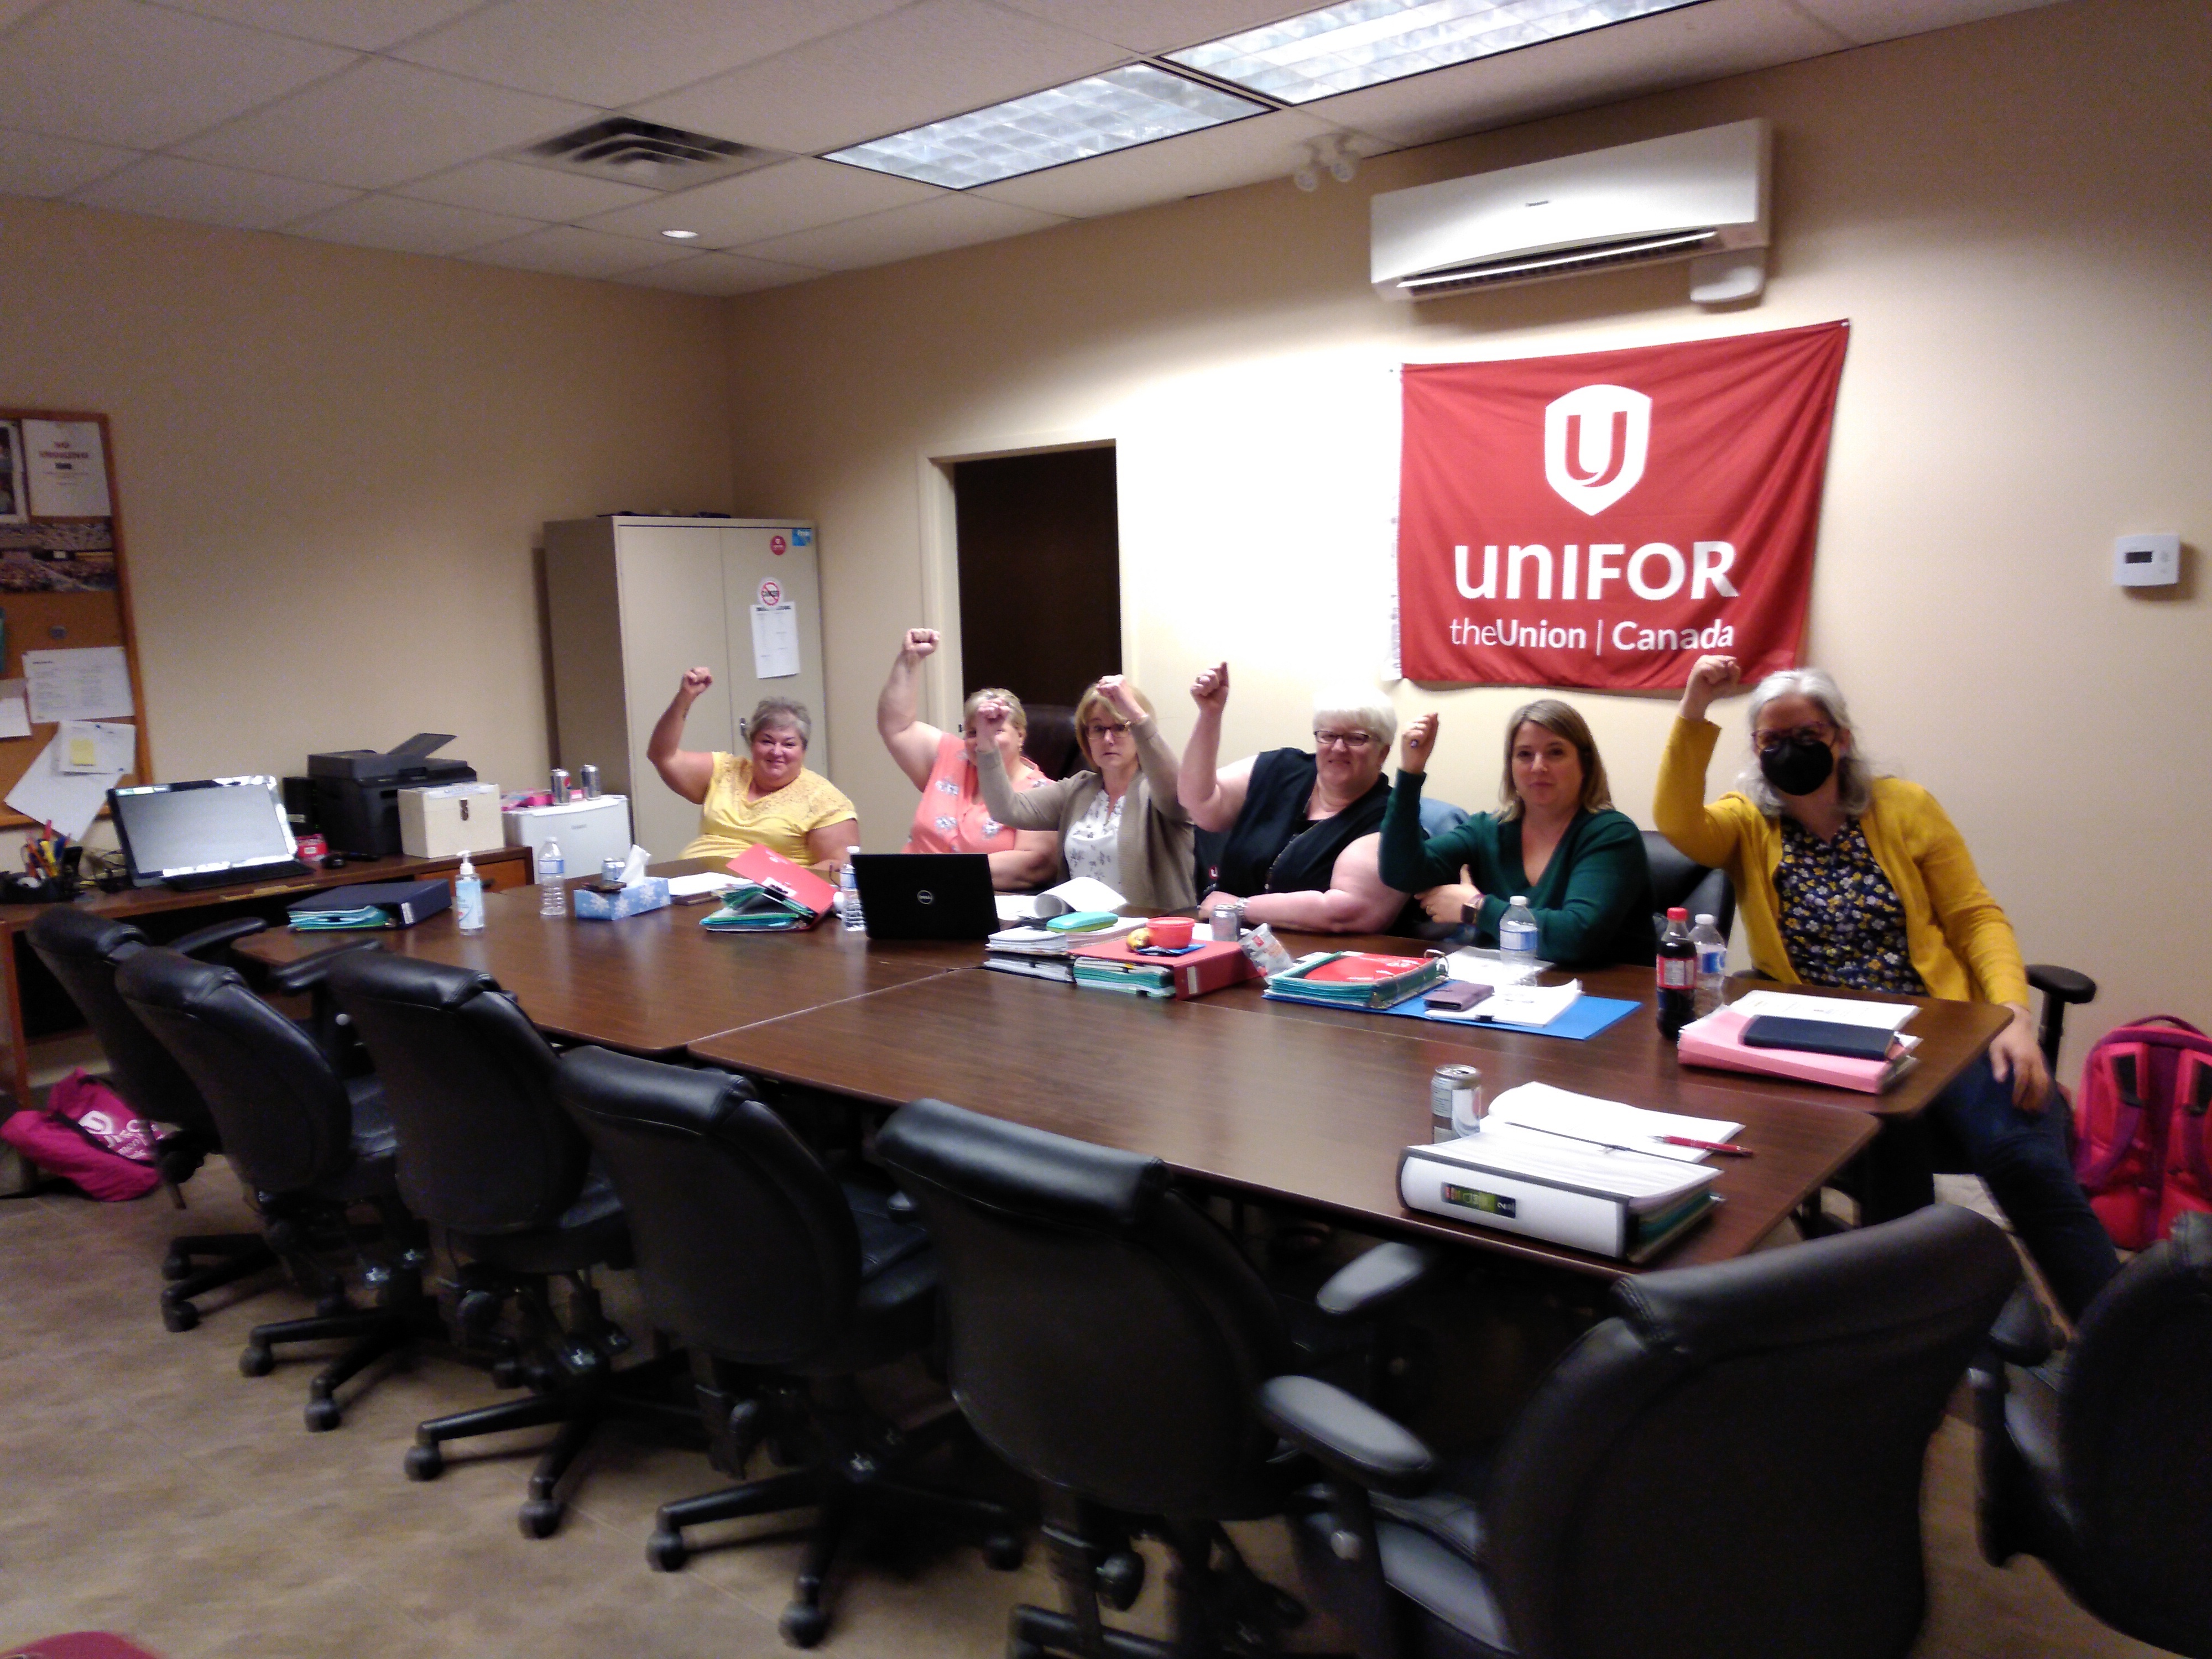 A group of women with their arms raised in the air, seated at a table. A red Unifor flag is shown on the wall behind.